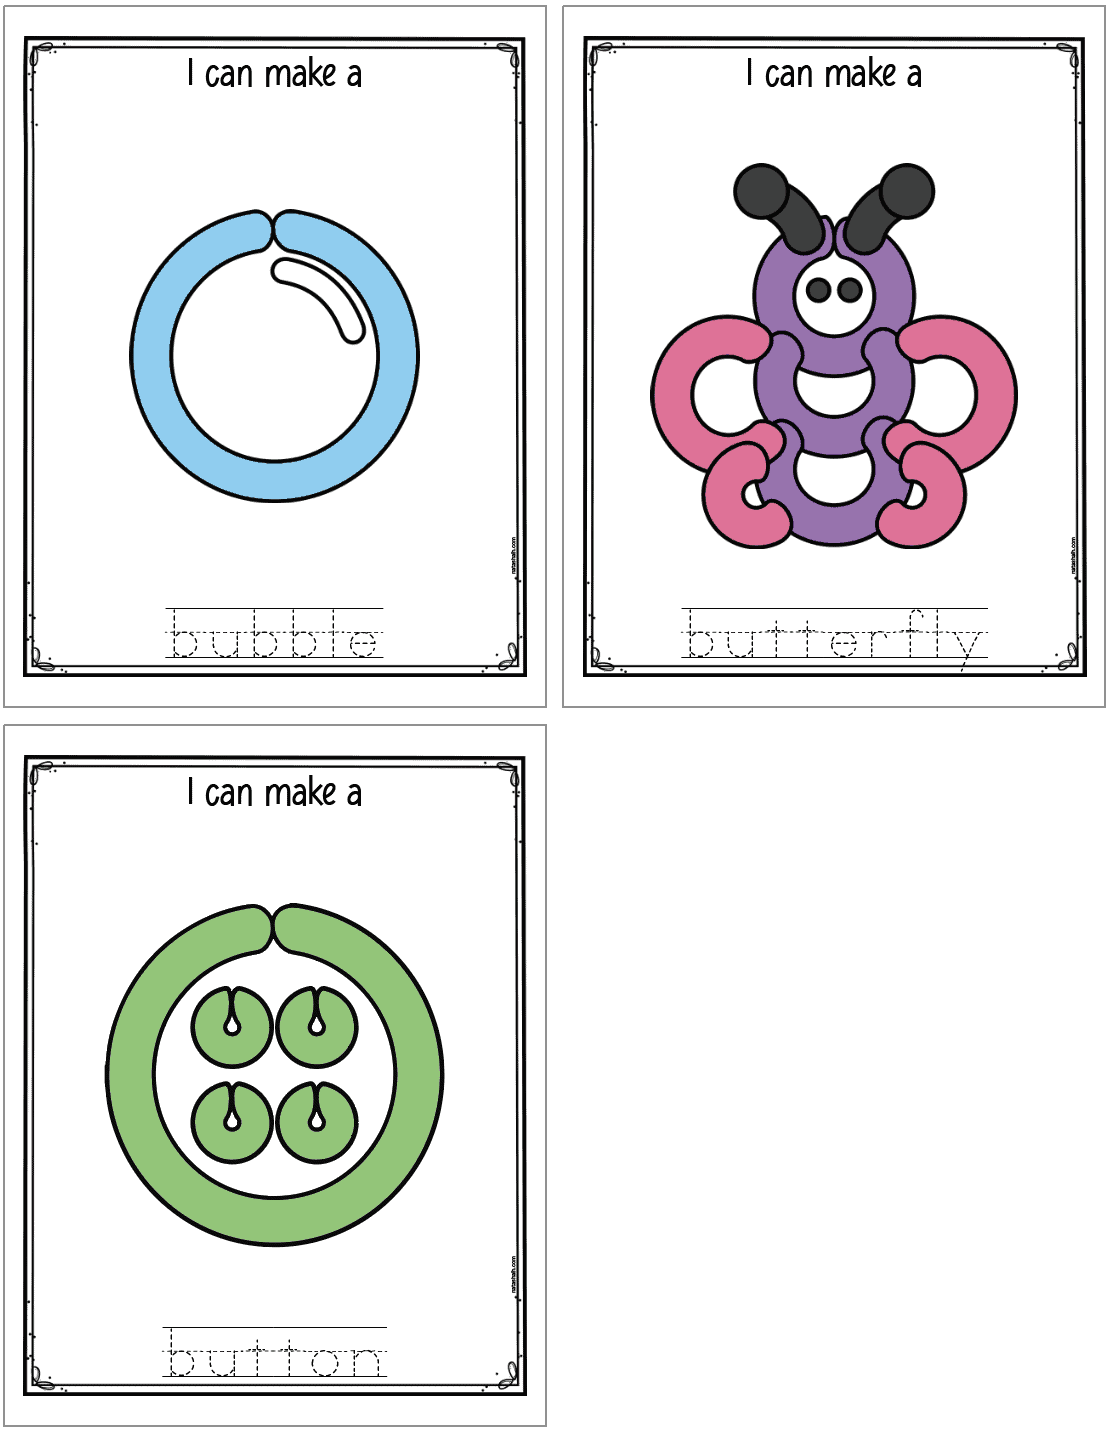 A preview of three play dough activity mats with images starting with the letter B. Mats include: a bubble, a butterfly, and a button